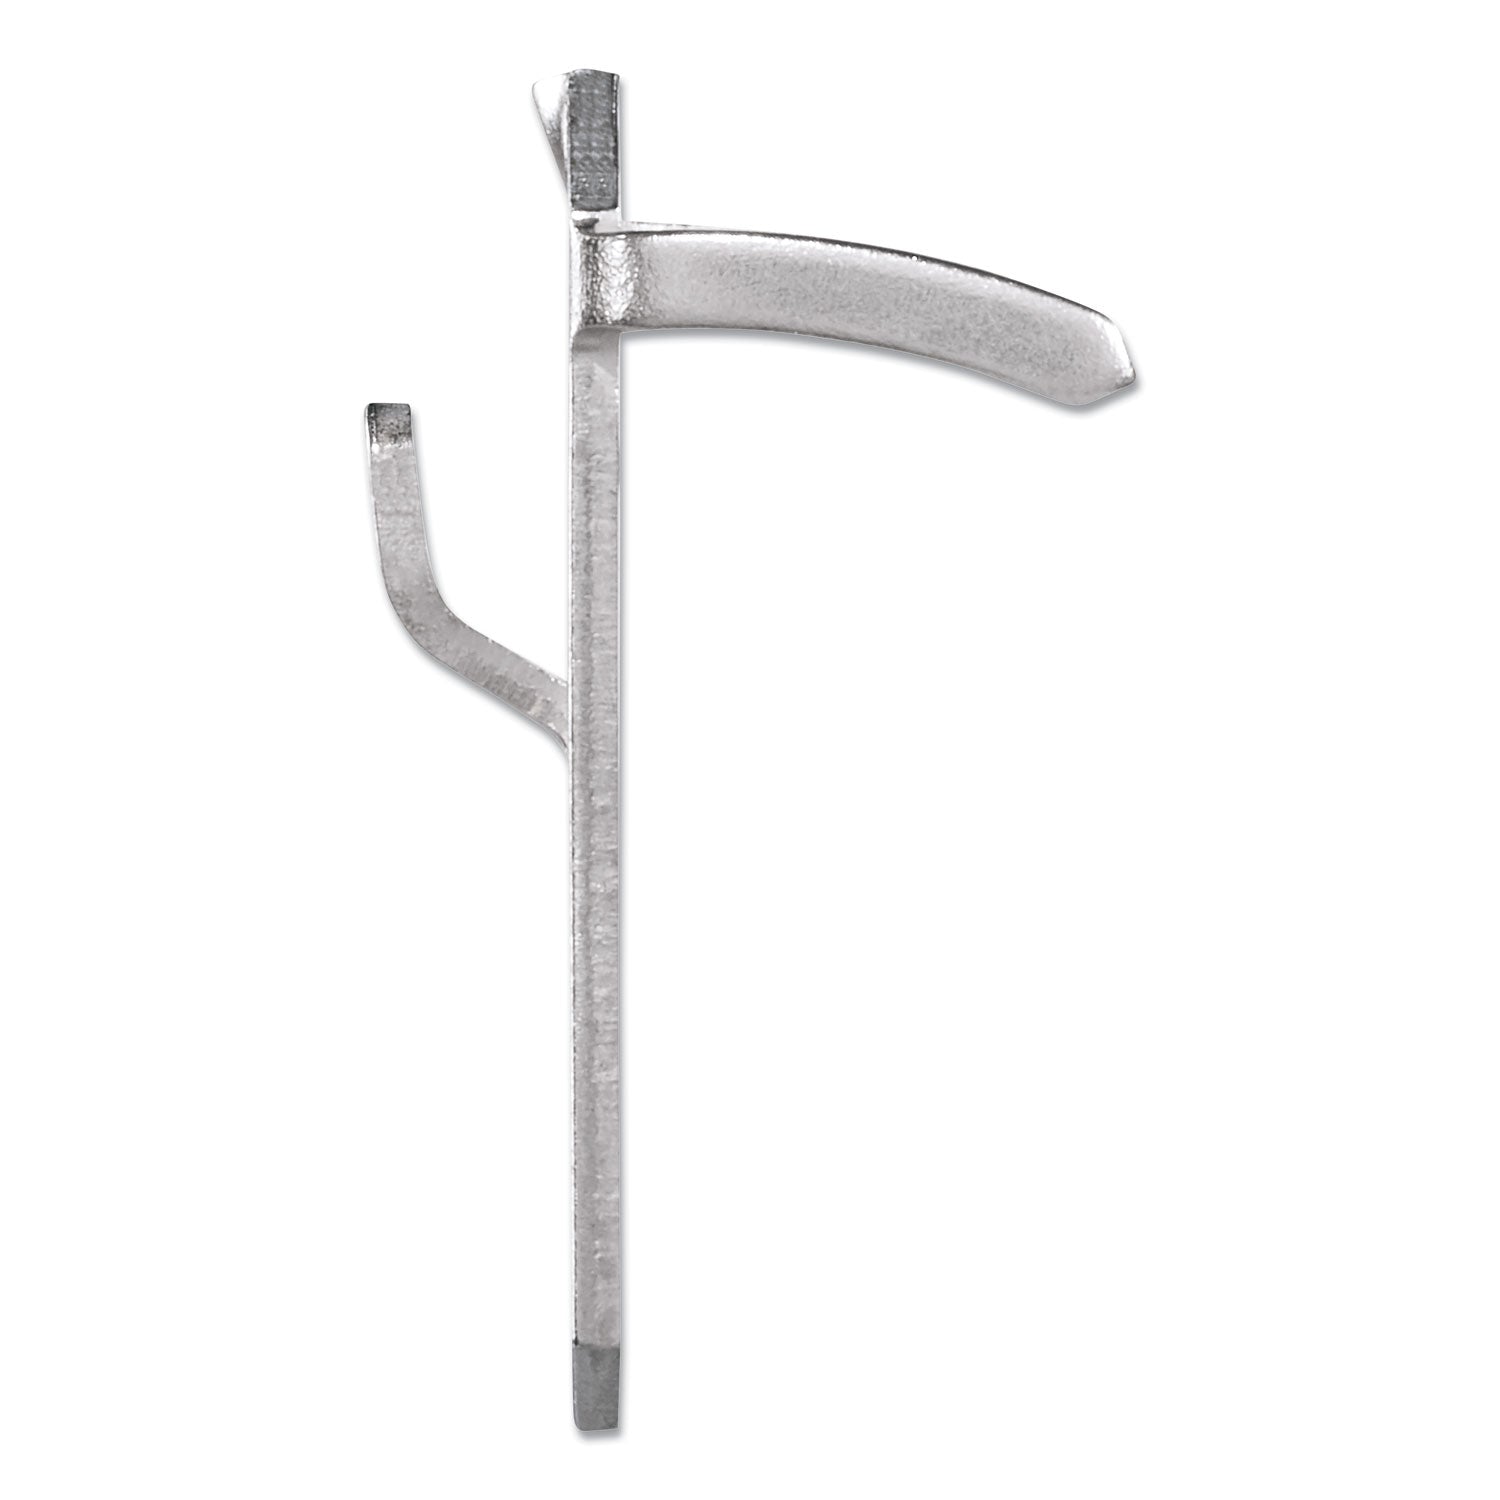 claw-drywall-picture-hanger-stainless-steel-25-lb-capacity-4-hooks-and-4-spot-markers_mmm3ph25m4es - 5